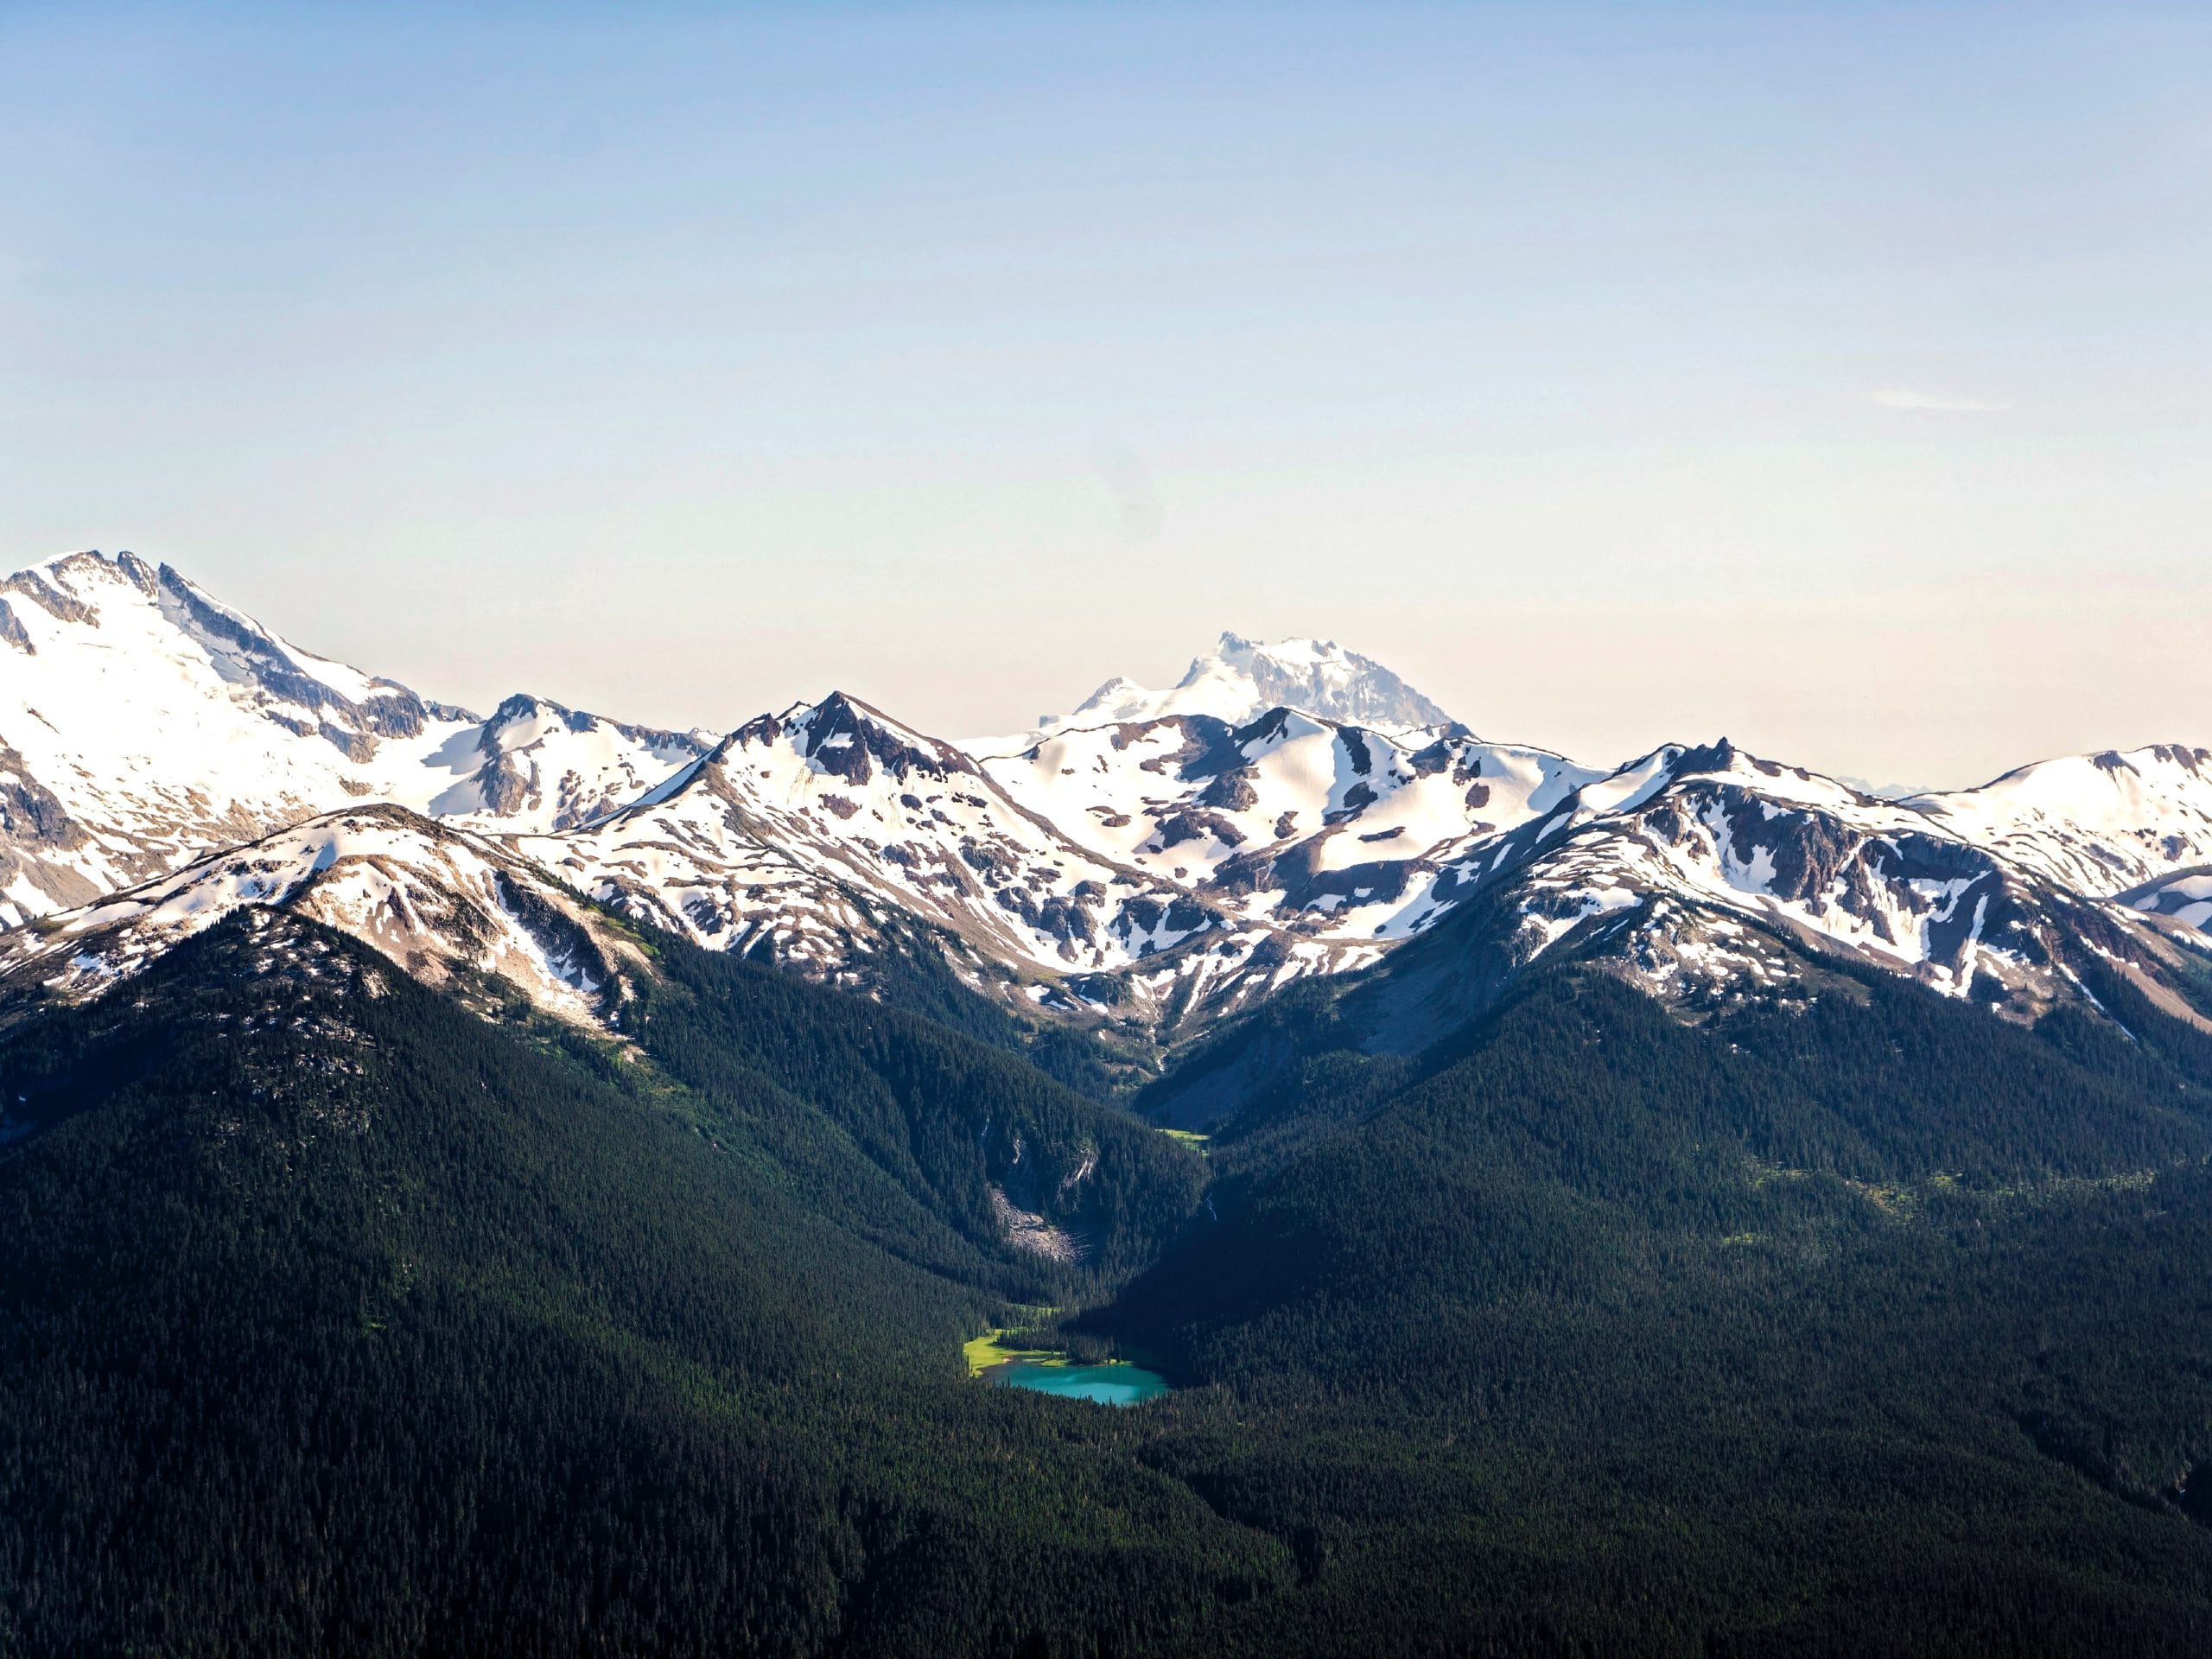 View of the blackcomb mountain